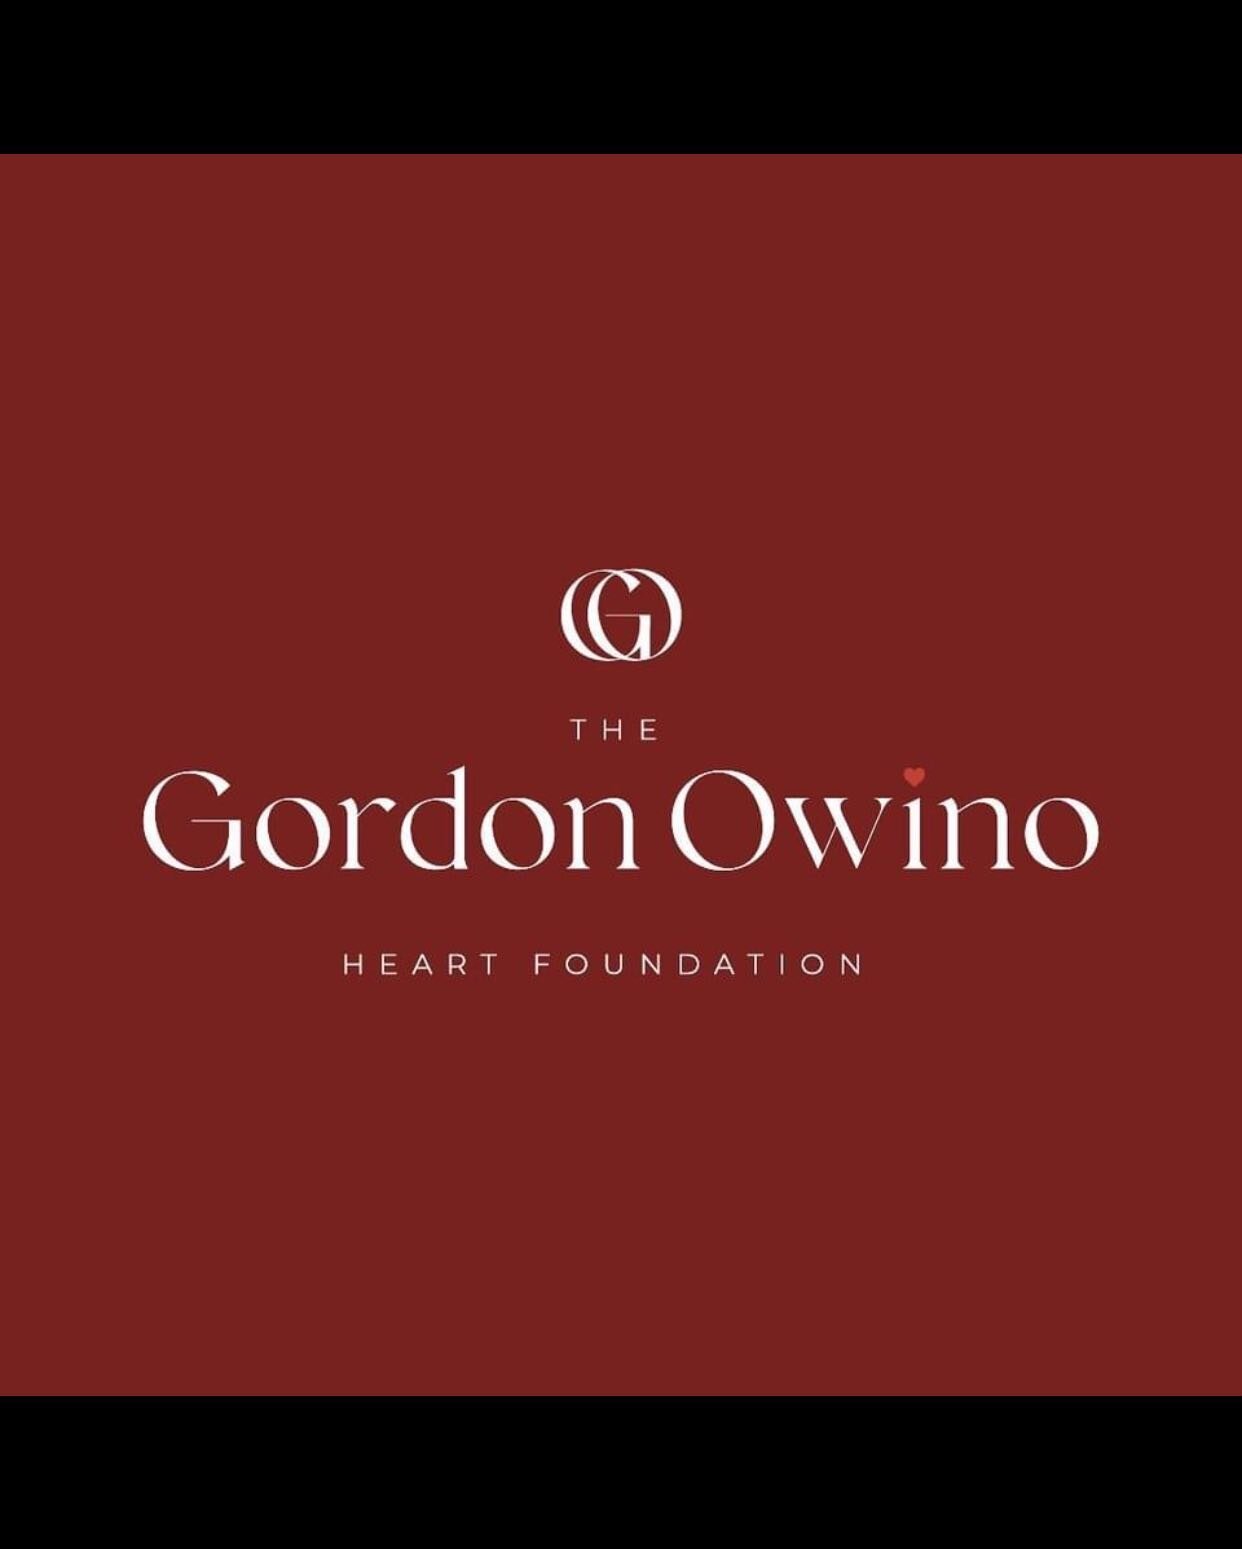 Want to join me in supporting a good cause? This #GivingTuesday we are raising money for The Gordon Owino Heart Foundation and your contribution will make an impact, whether you donate $5 or $500. Every little bit helps! 

The Gordon Owino Heart Foun